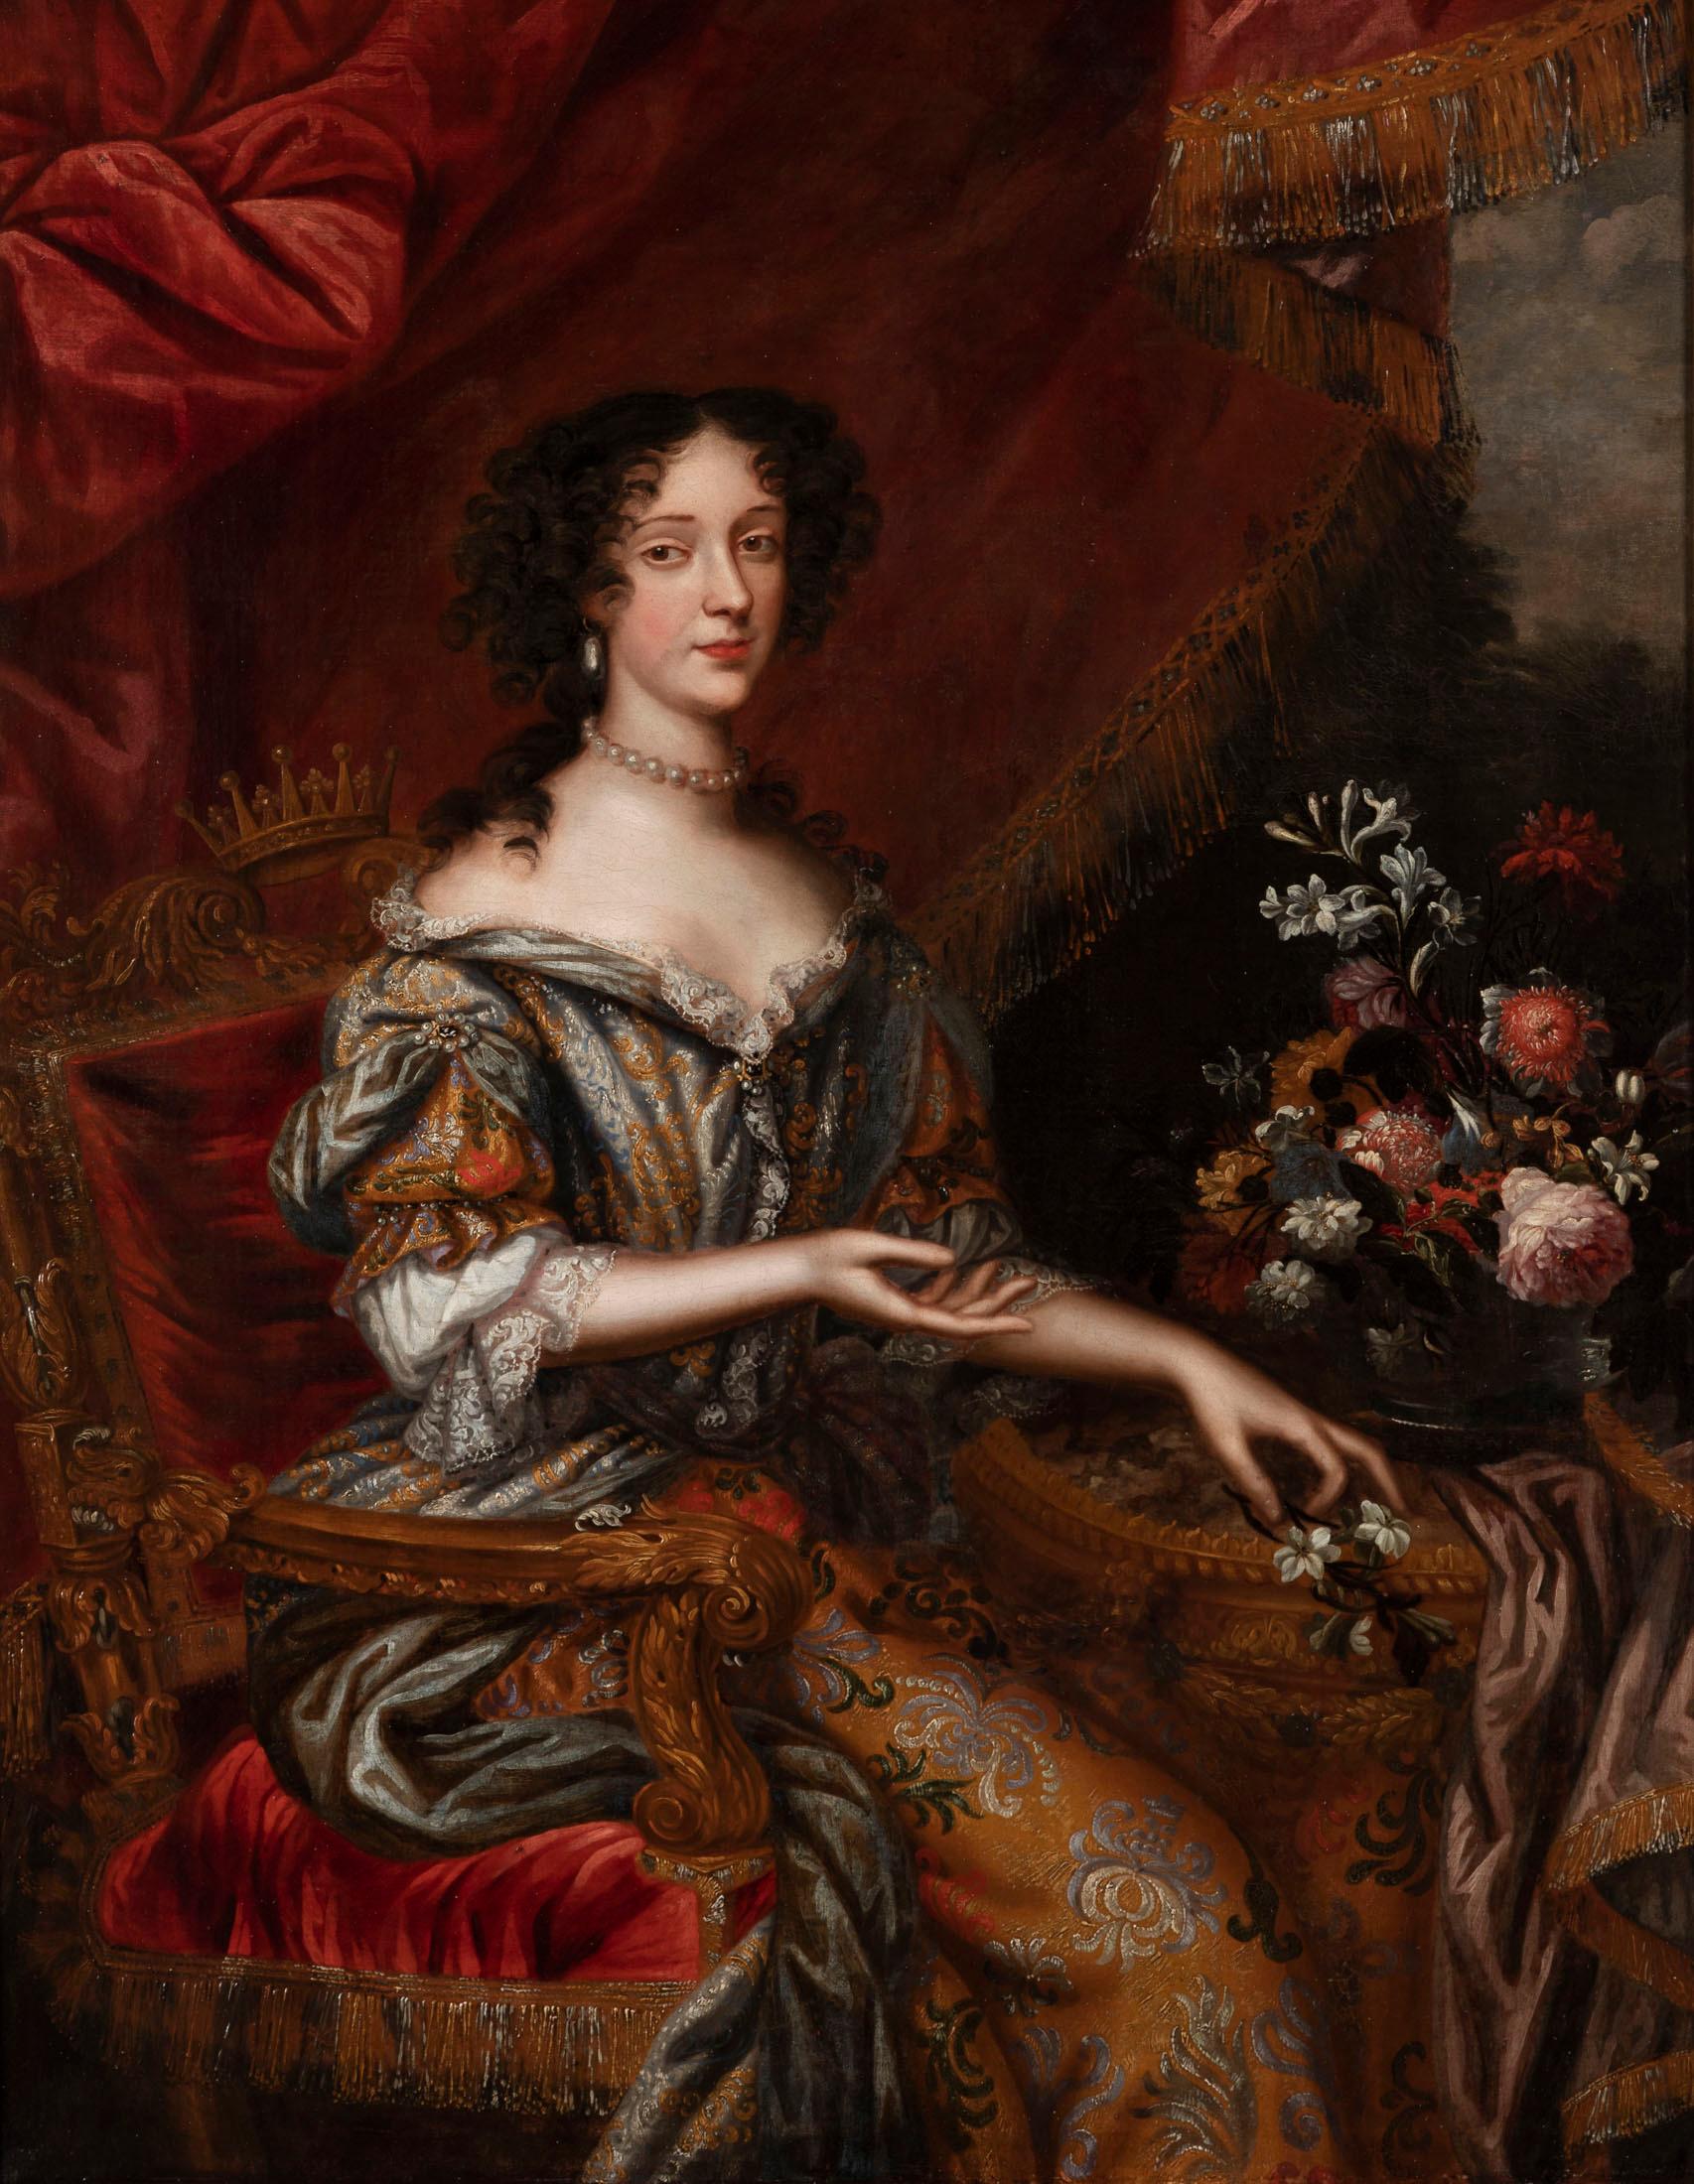 Portrait of Marie Béatrice Eléonore Isabelle d'Este, Princess of Modena (1658-1718) attributed to Henri Gascar (1635-1701), 17th century.

Original frame and canvas.

Marie Béatrice was born in Modena, Italy in 1658. Her father, the Duke of